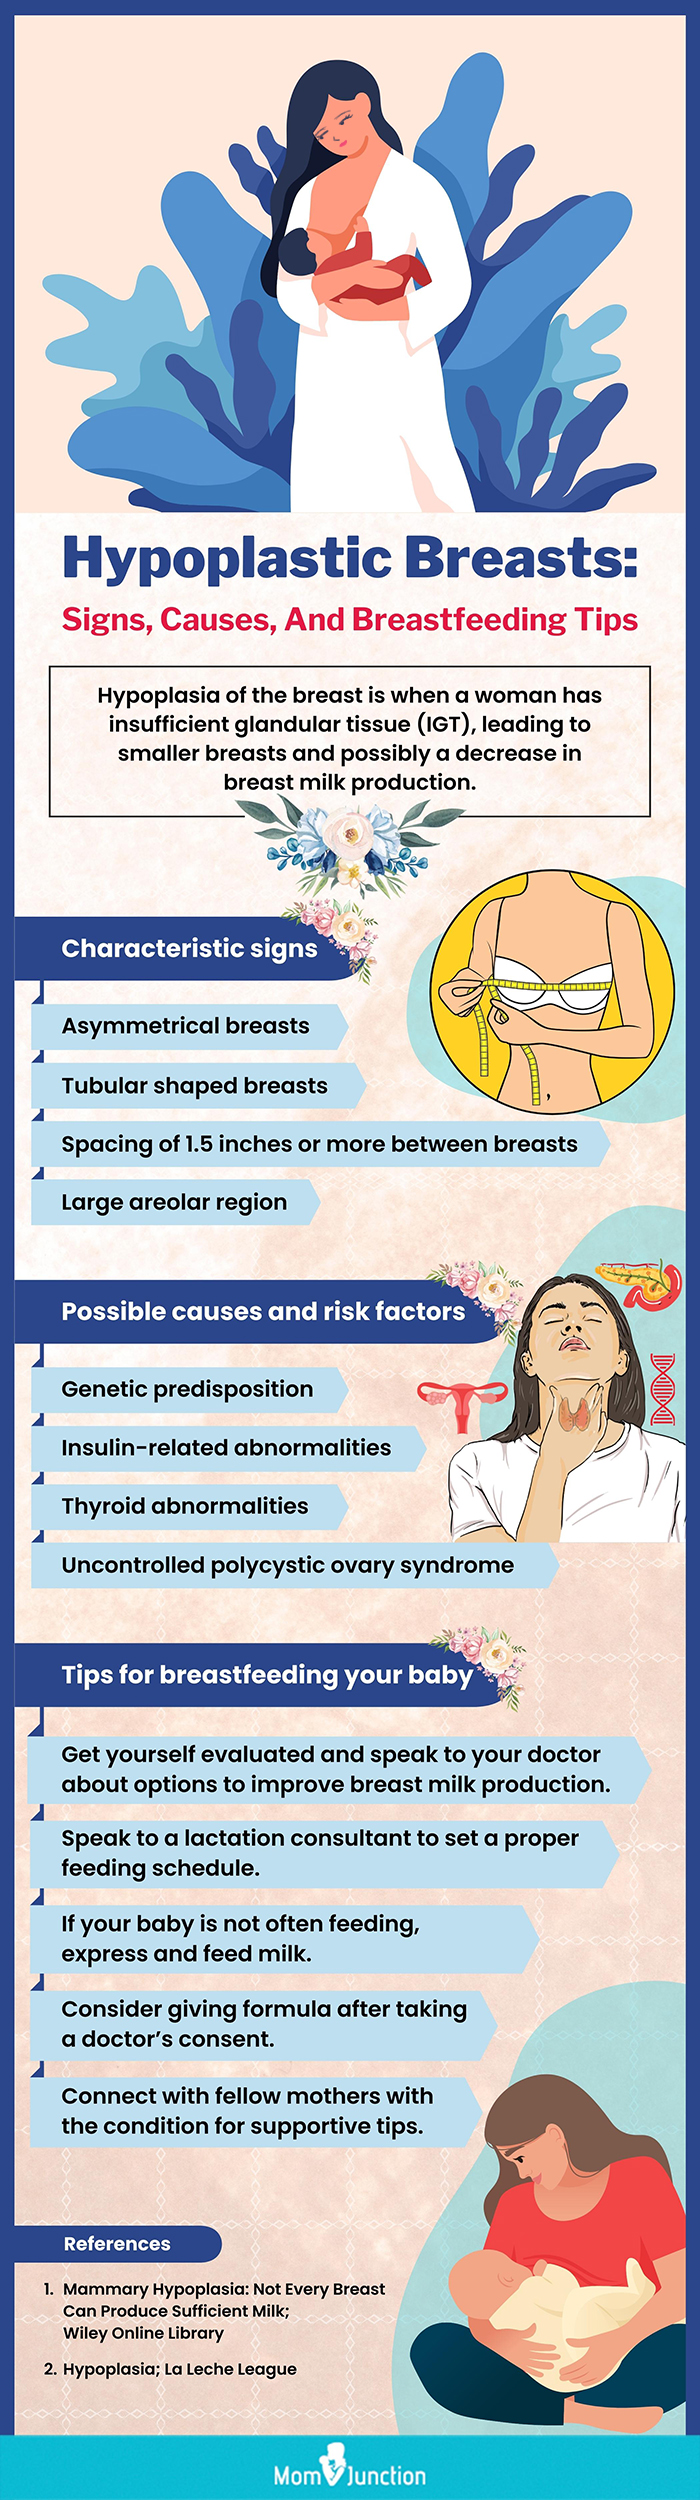 hypoplastic breasts signs causes and breastfeeding tips (infographic)